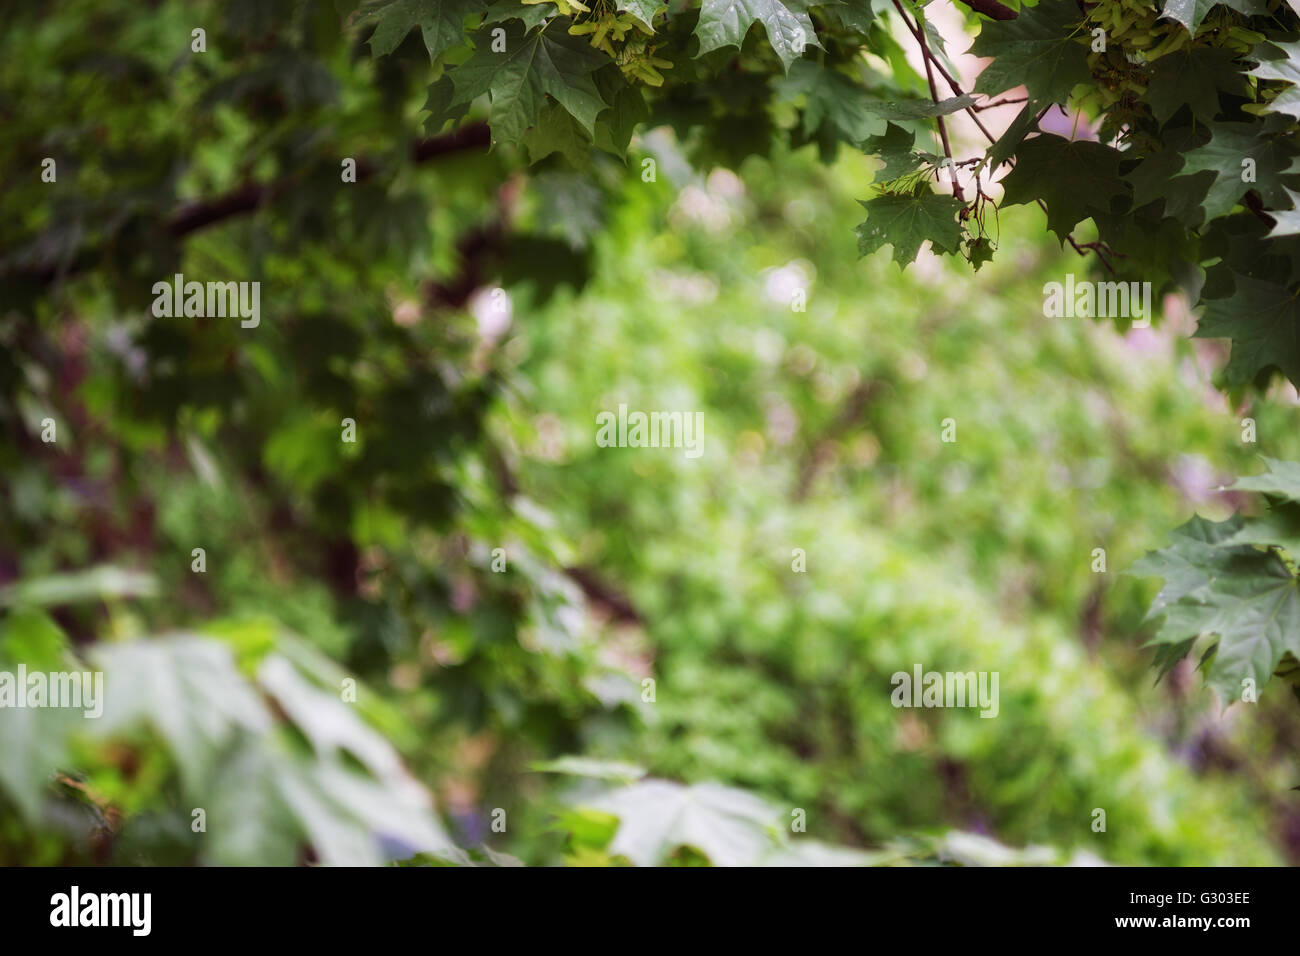 Sunny Maple in the wind. Blurred image, shallow depth of field. Frame and maple branches. Stock Photo